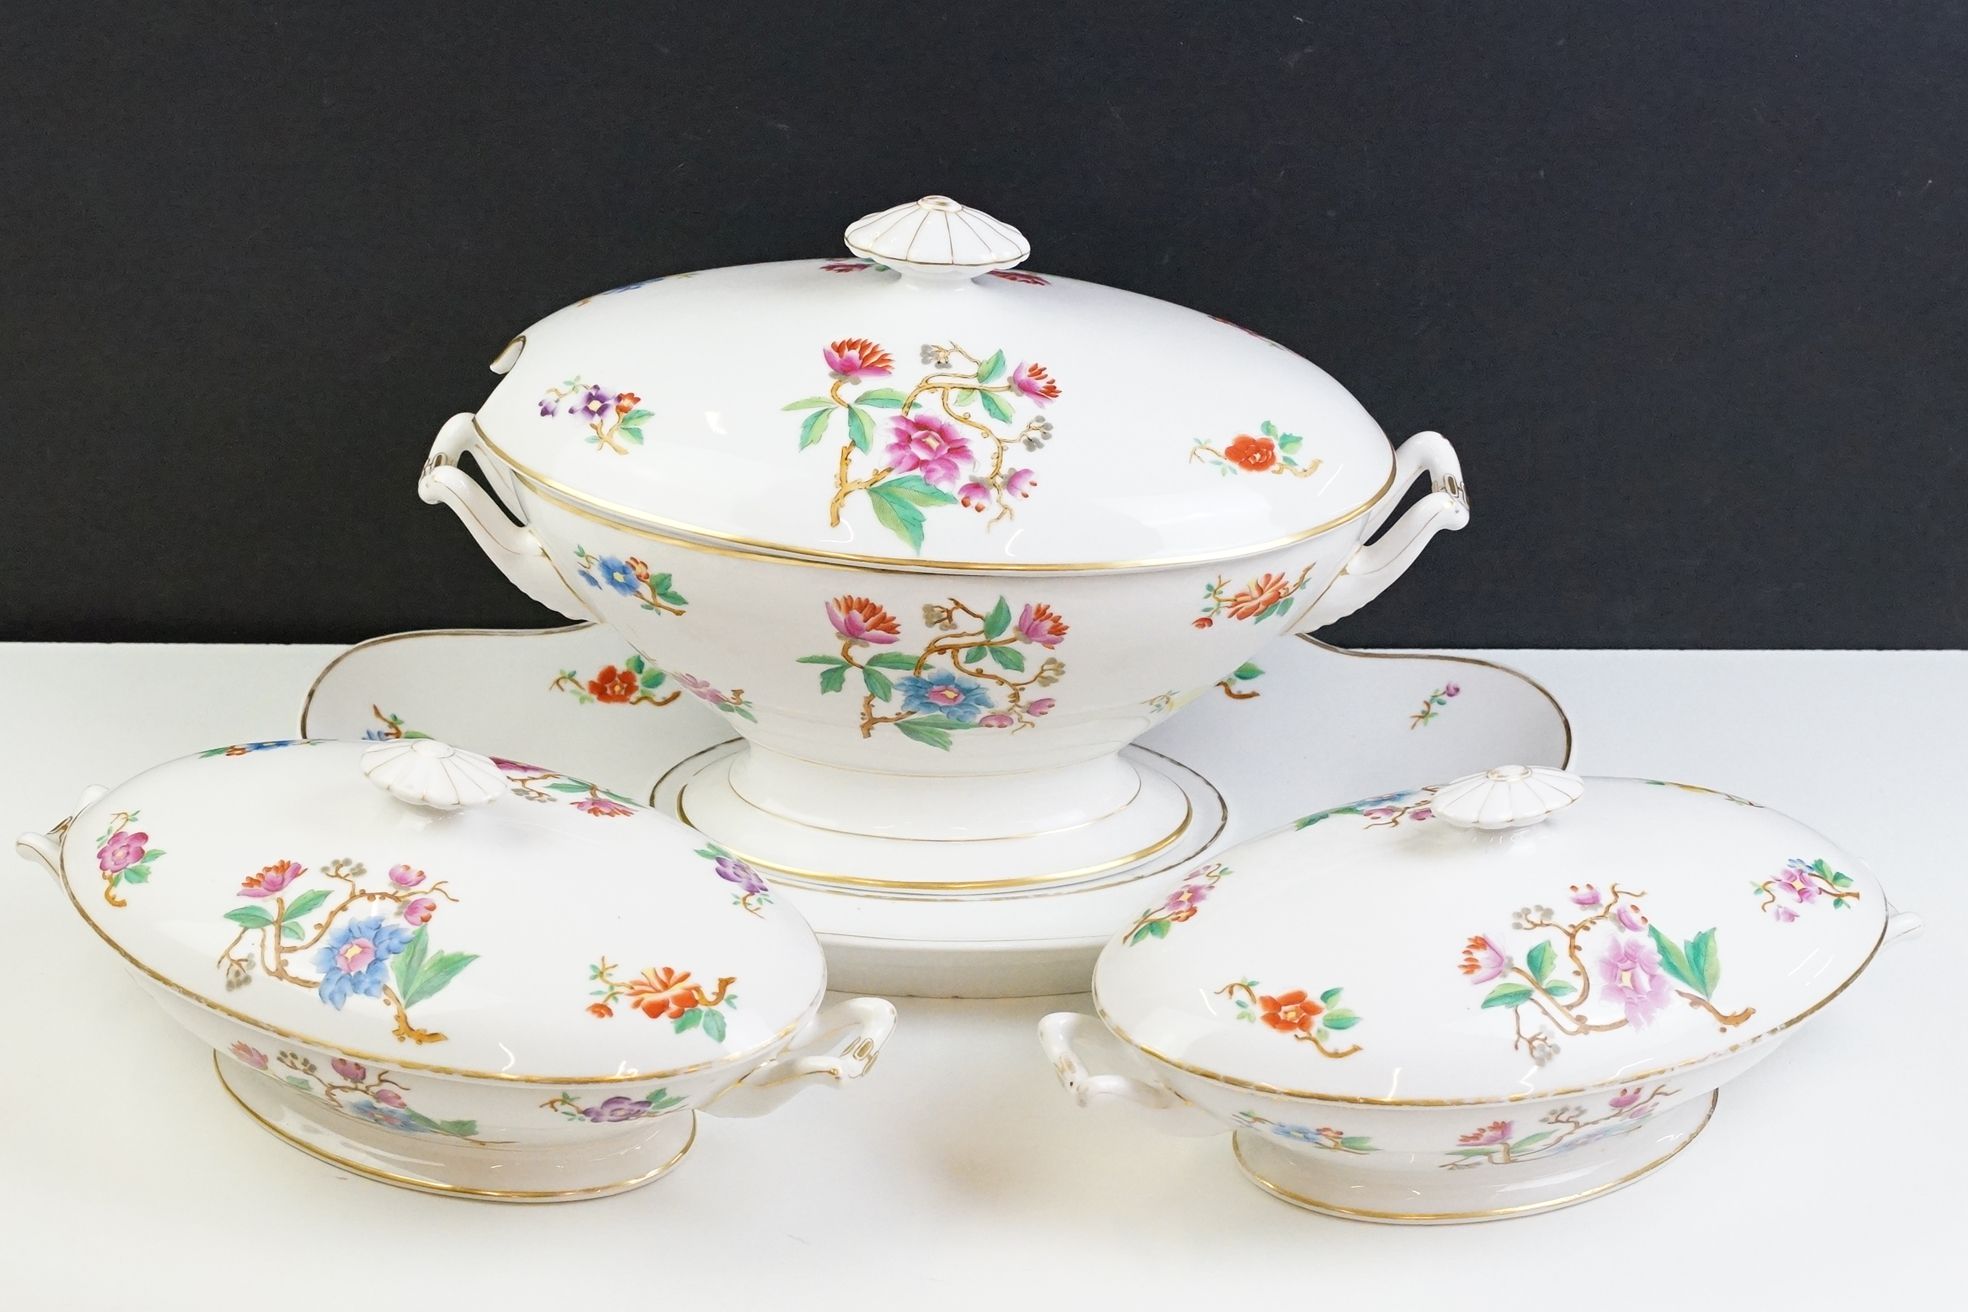 19th Century white ceramic large footed serving tureen with hand coloured floral decoration